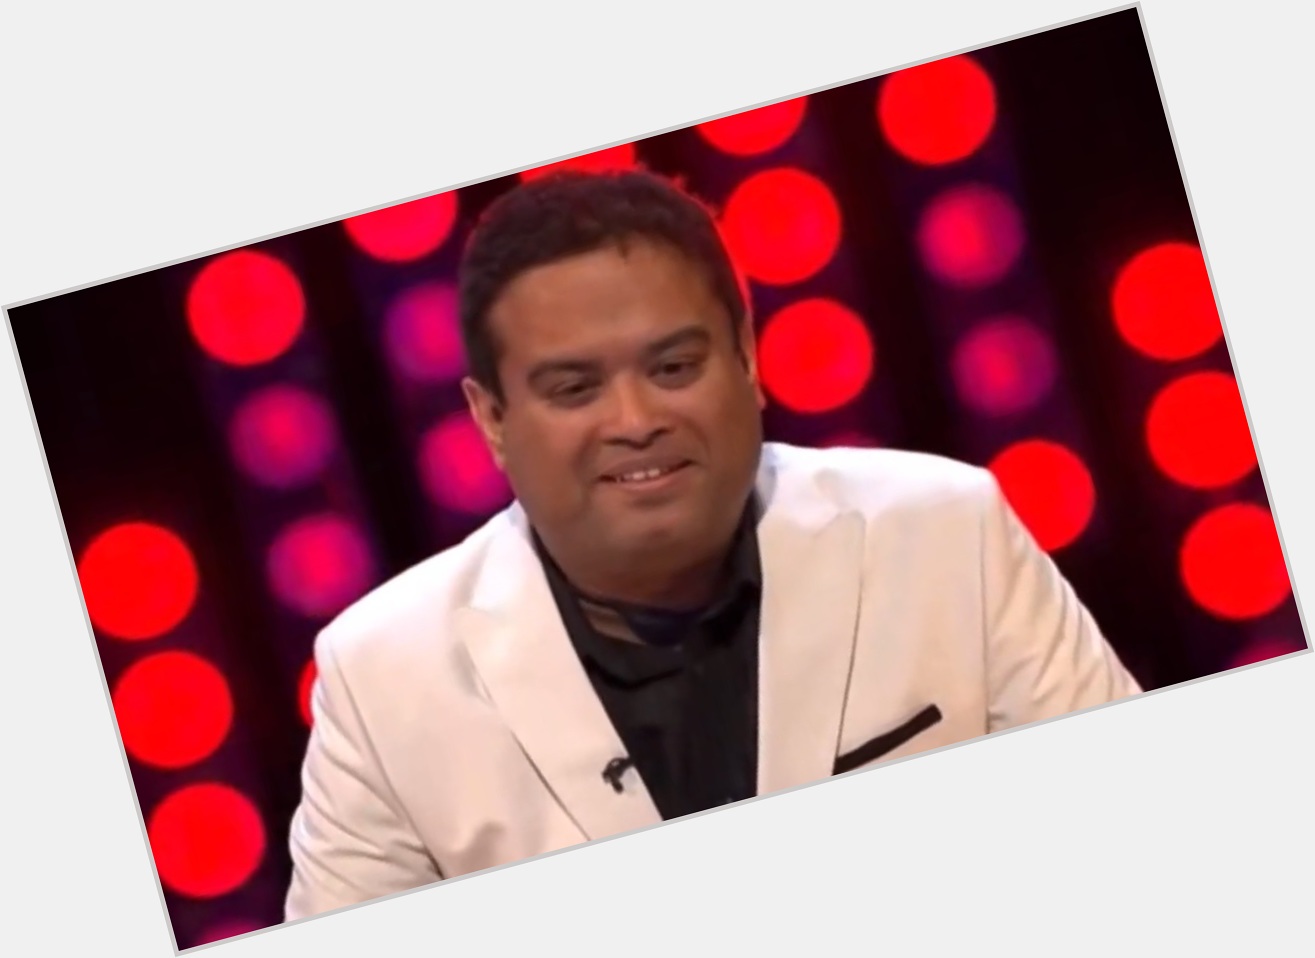 A Happy Birthdy to Paul Sinha who is celebrating his 53rd birthday today. 